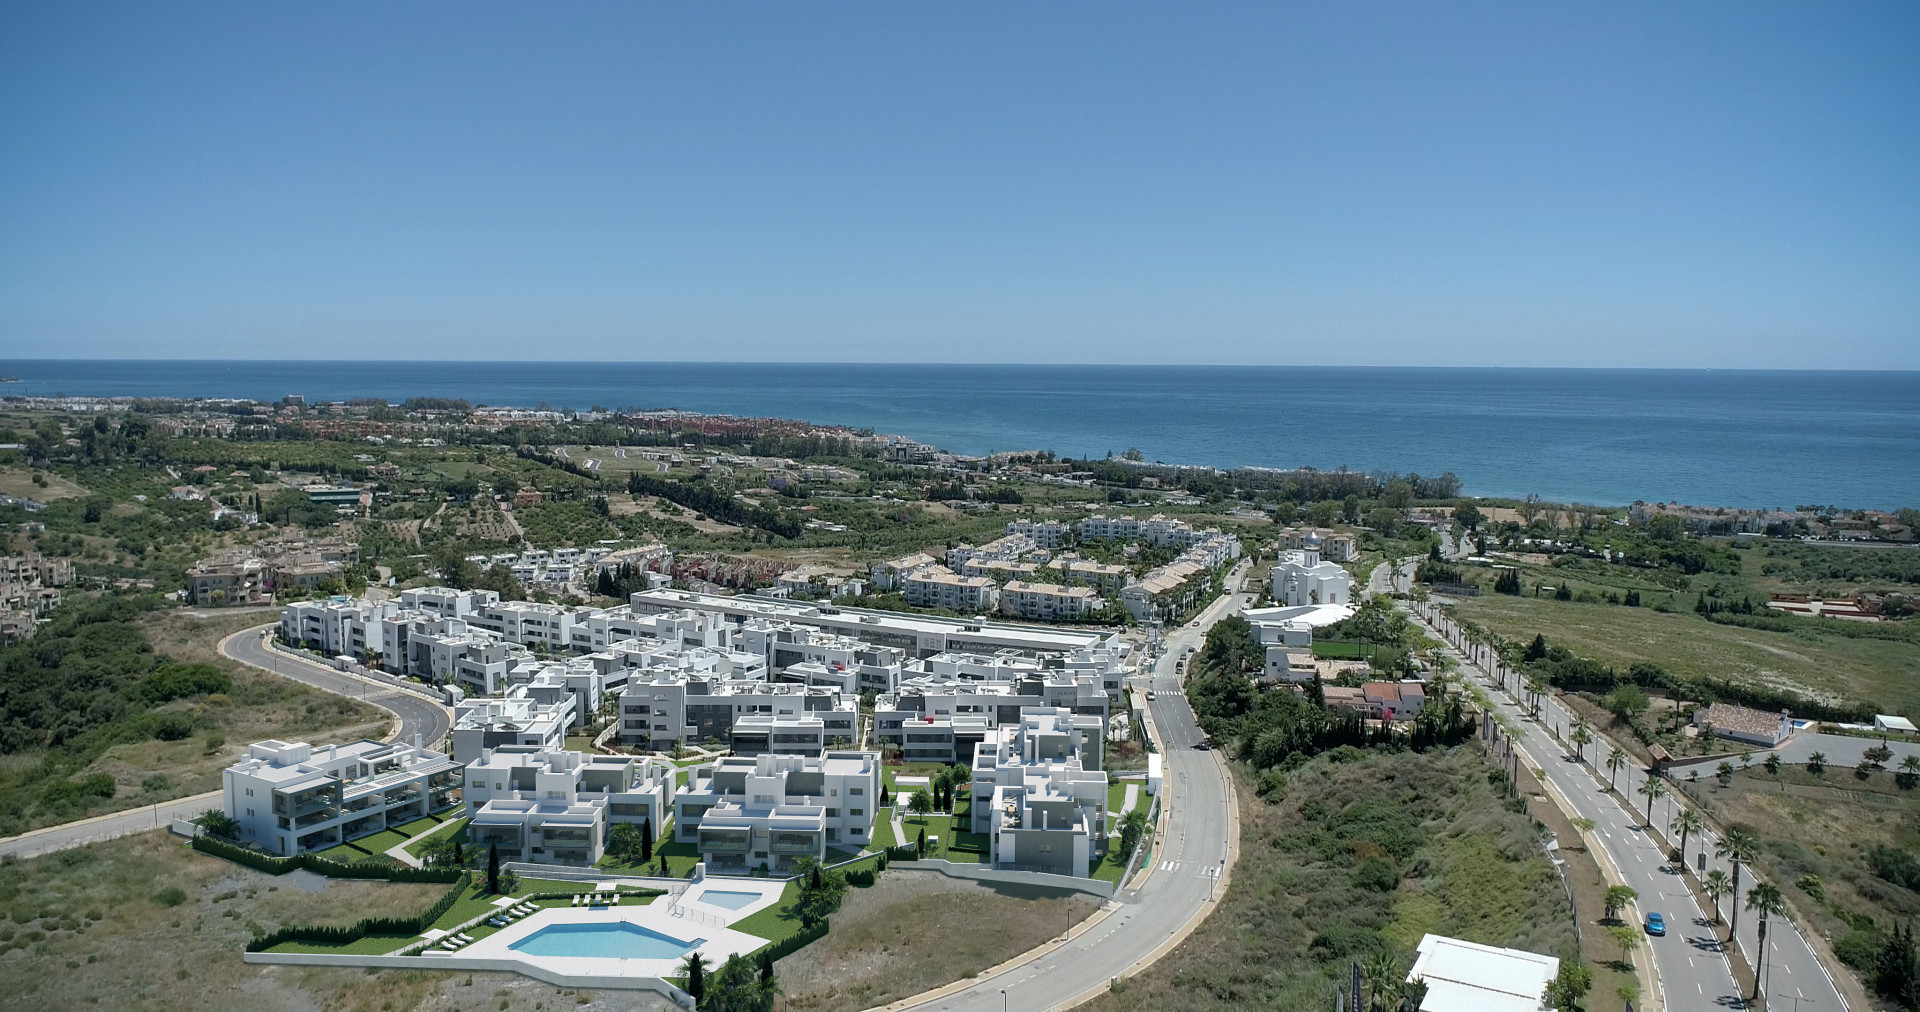 New development of exclusive 1 to 4 bedroom apartments located in an exclusive urbanization in Estepona